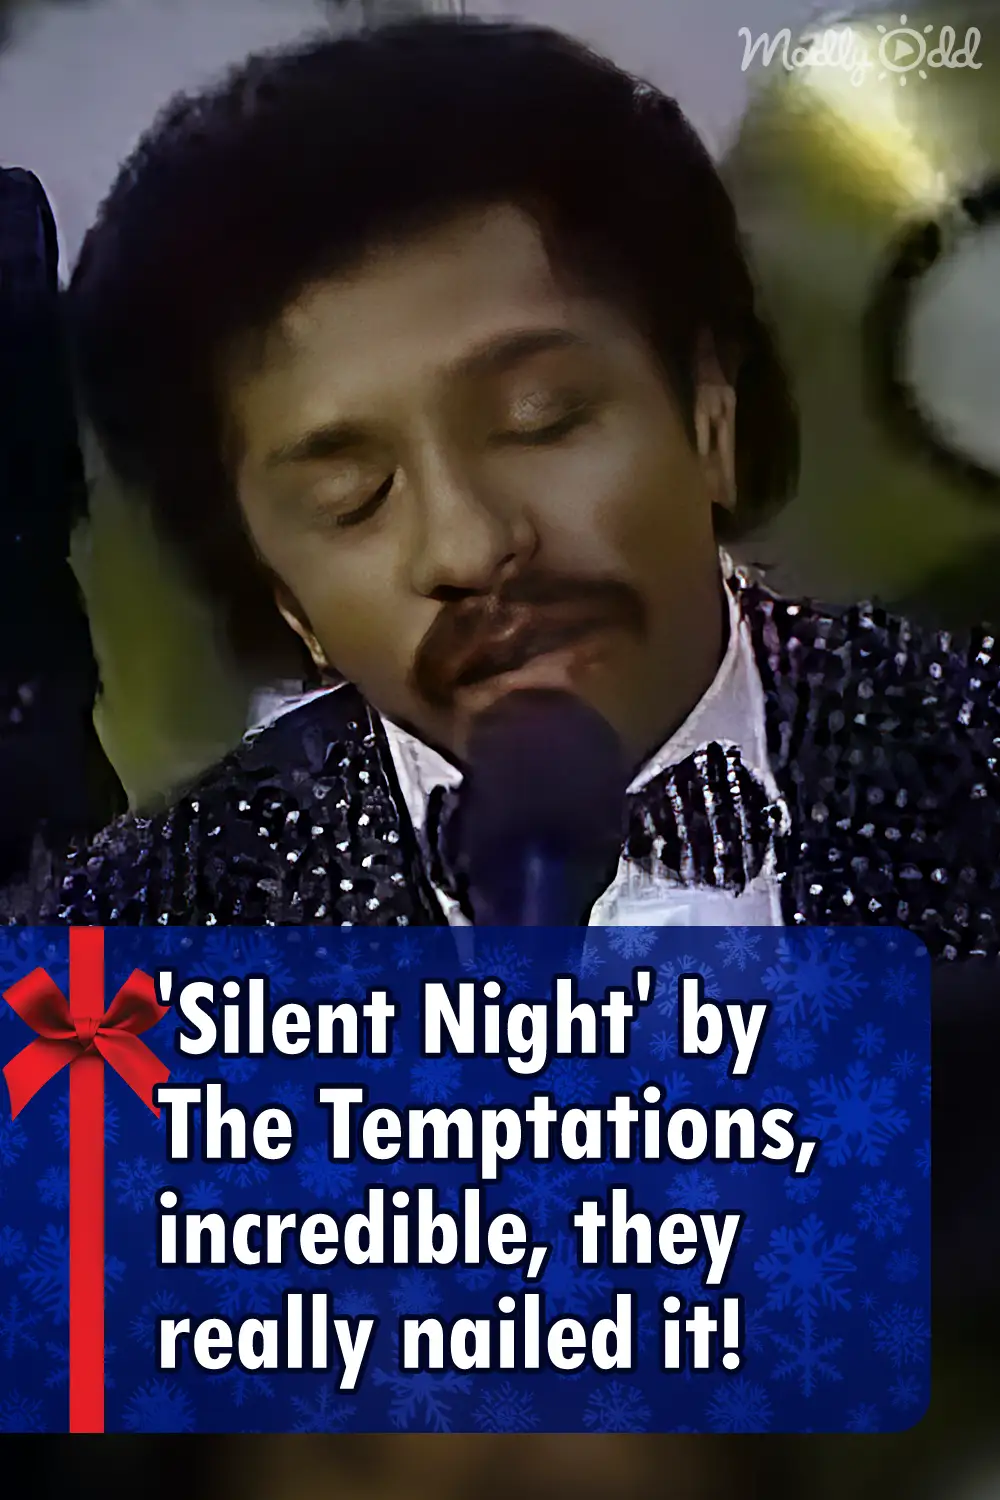 \'Silent Night\' by The Temptations, incredible, they really nailed it!